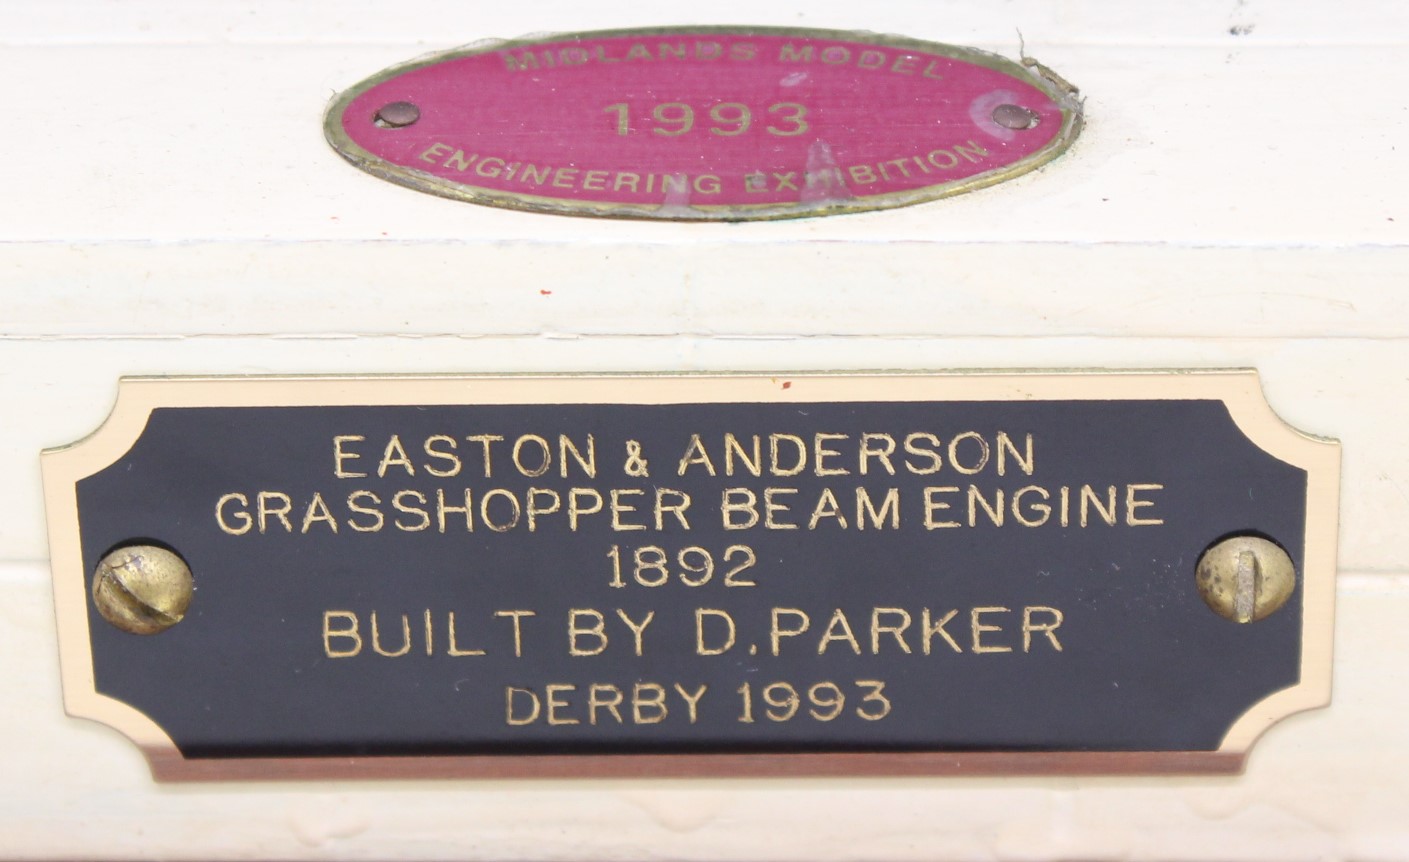 Easton & Anderson: An Easton & Anderson Grasshopper Beam Engine, Built by D. Parker, Derby 1993, - Image 3 of 5